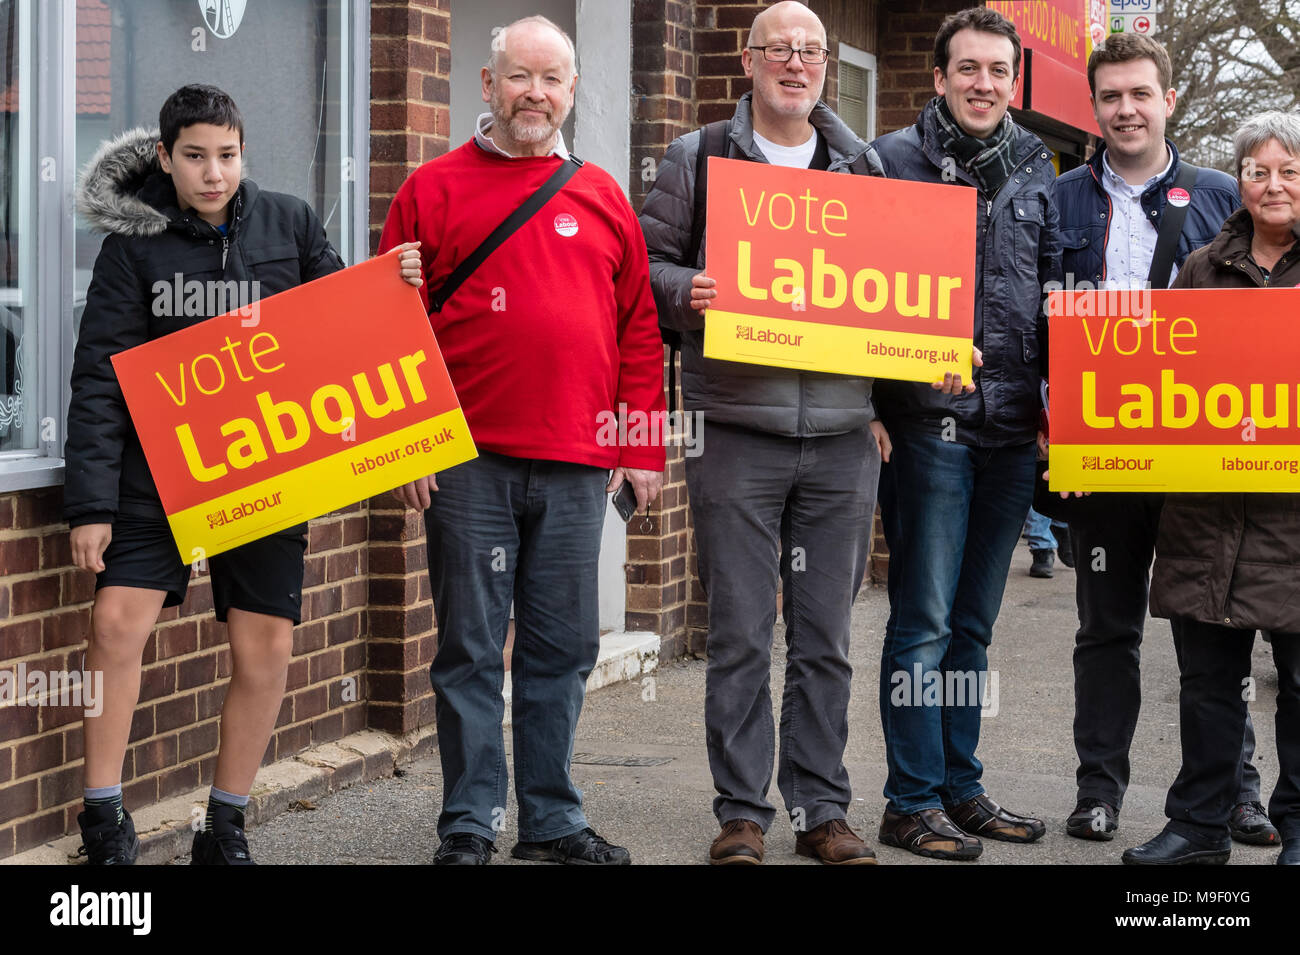 Brentwood, Essex 25th March 2018 Labour Party members canvassing for votes in Brentwood, Essex, ahead of the May local council elections.  The canvass is designed to identify Labour voters so they can be called on to vote on Election Day. Consent obtained  Credit Ian Davidson/Alamy Live News Stock Photo